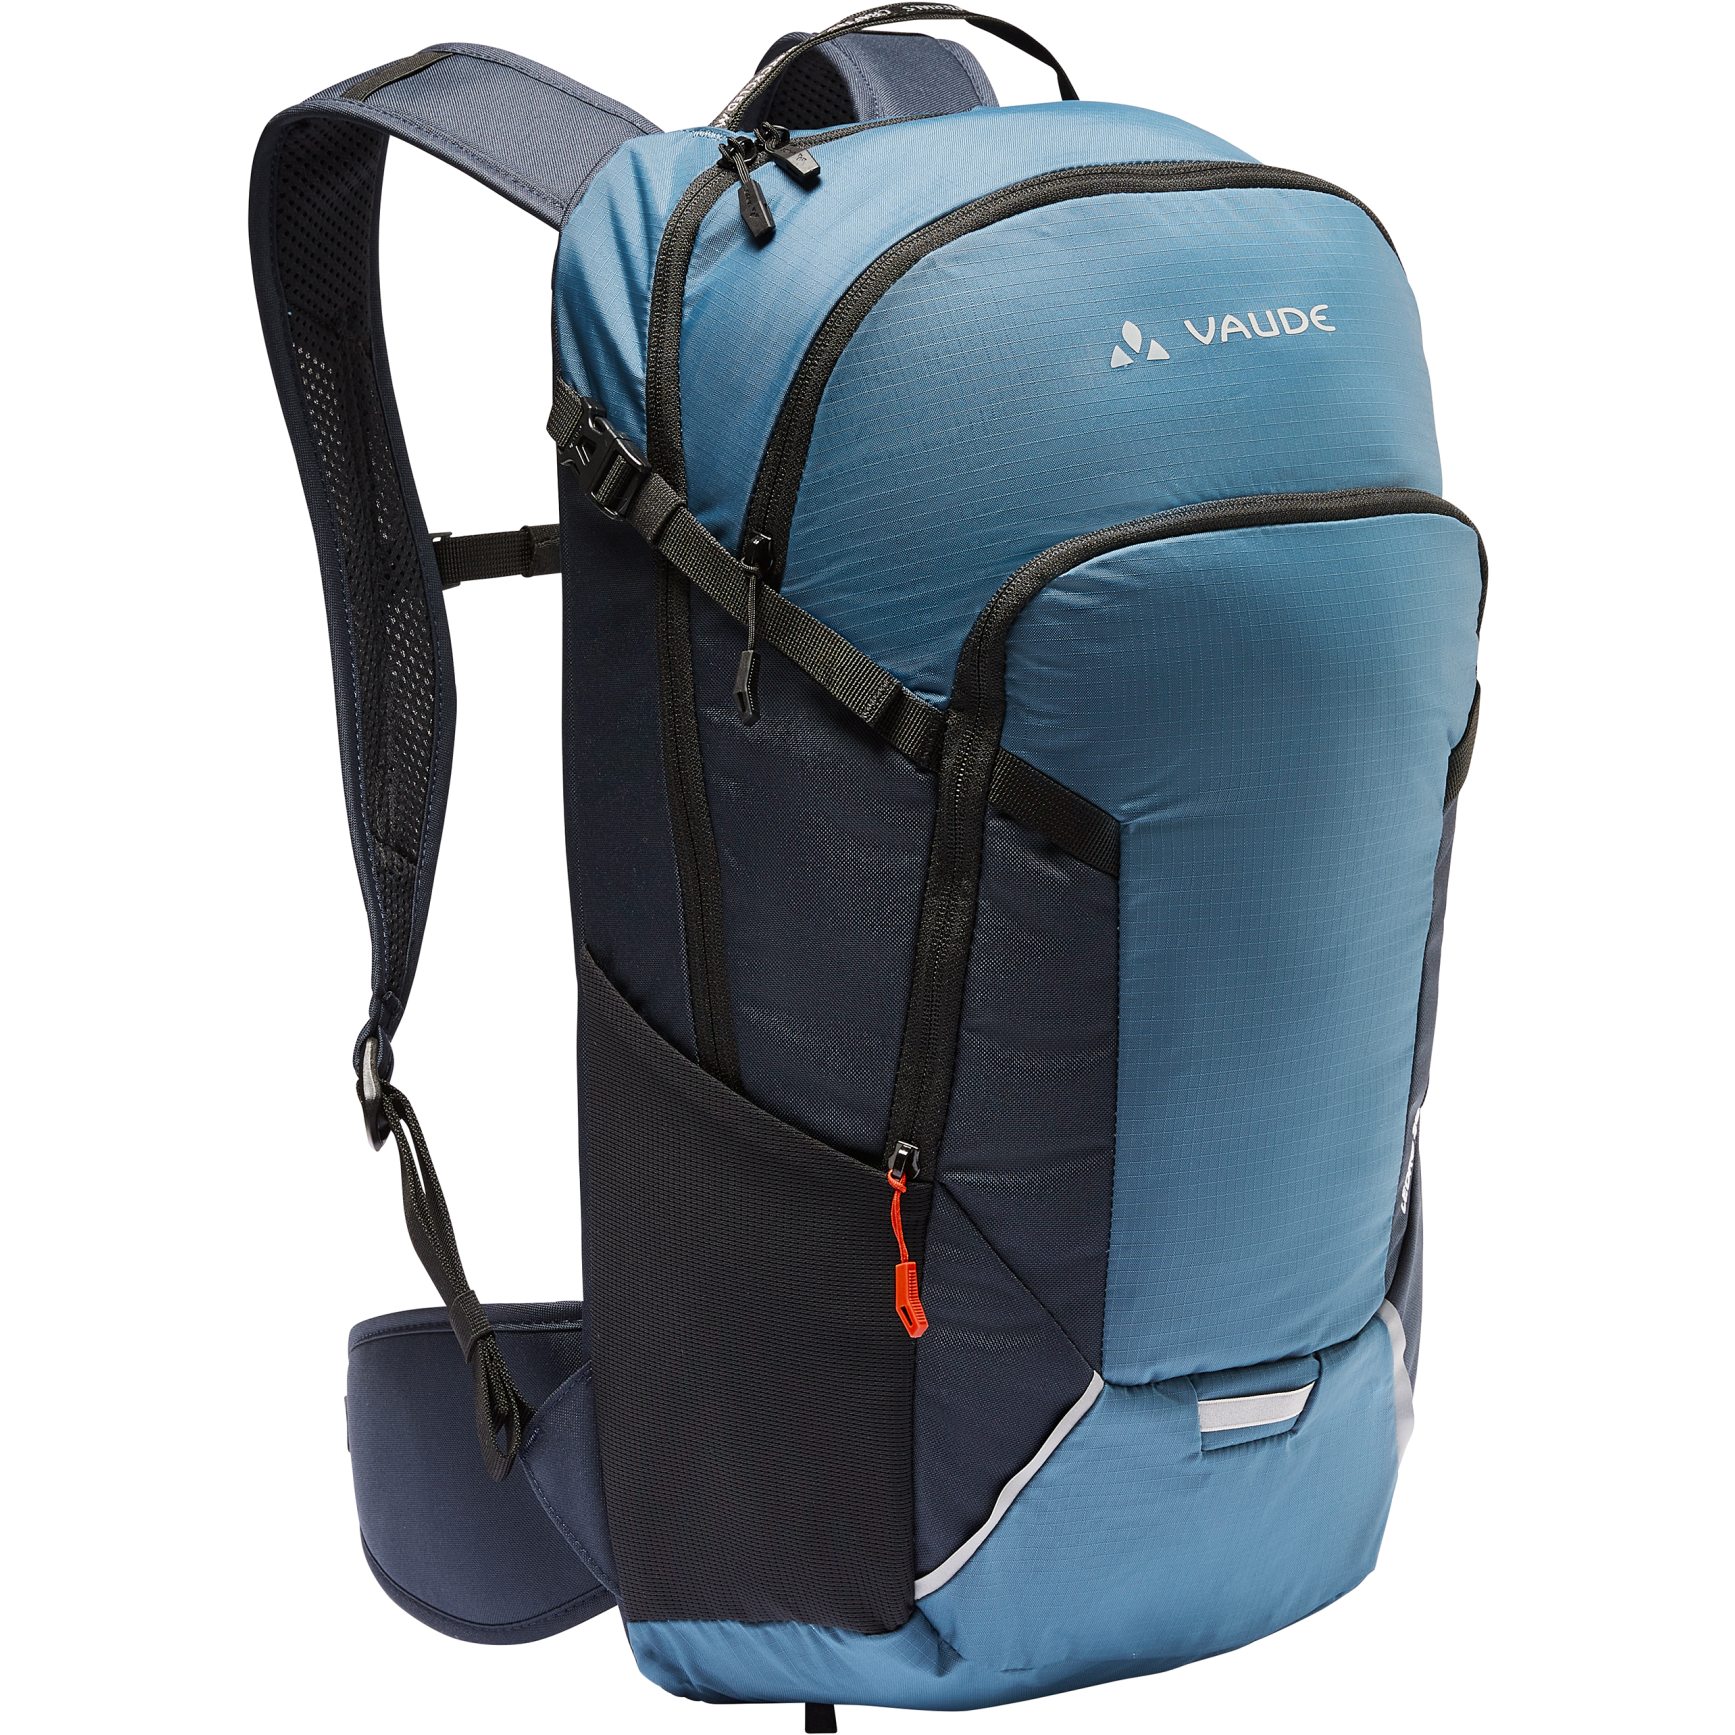 Picture of Vaude Ledro 18L Backpack - baltic sea